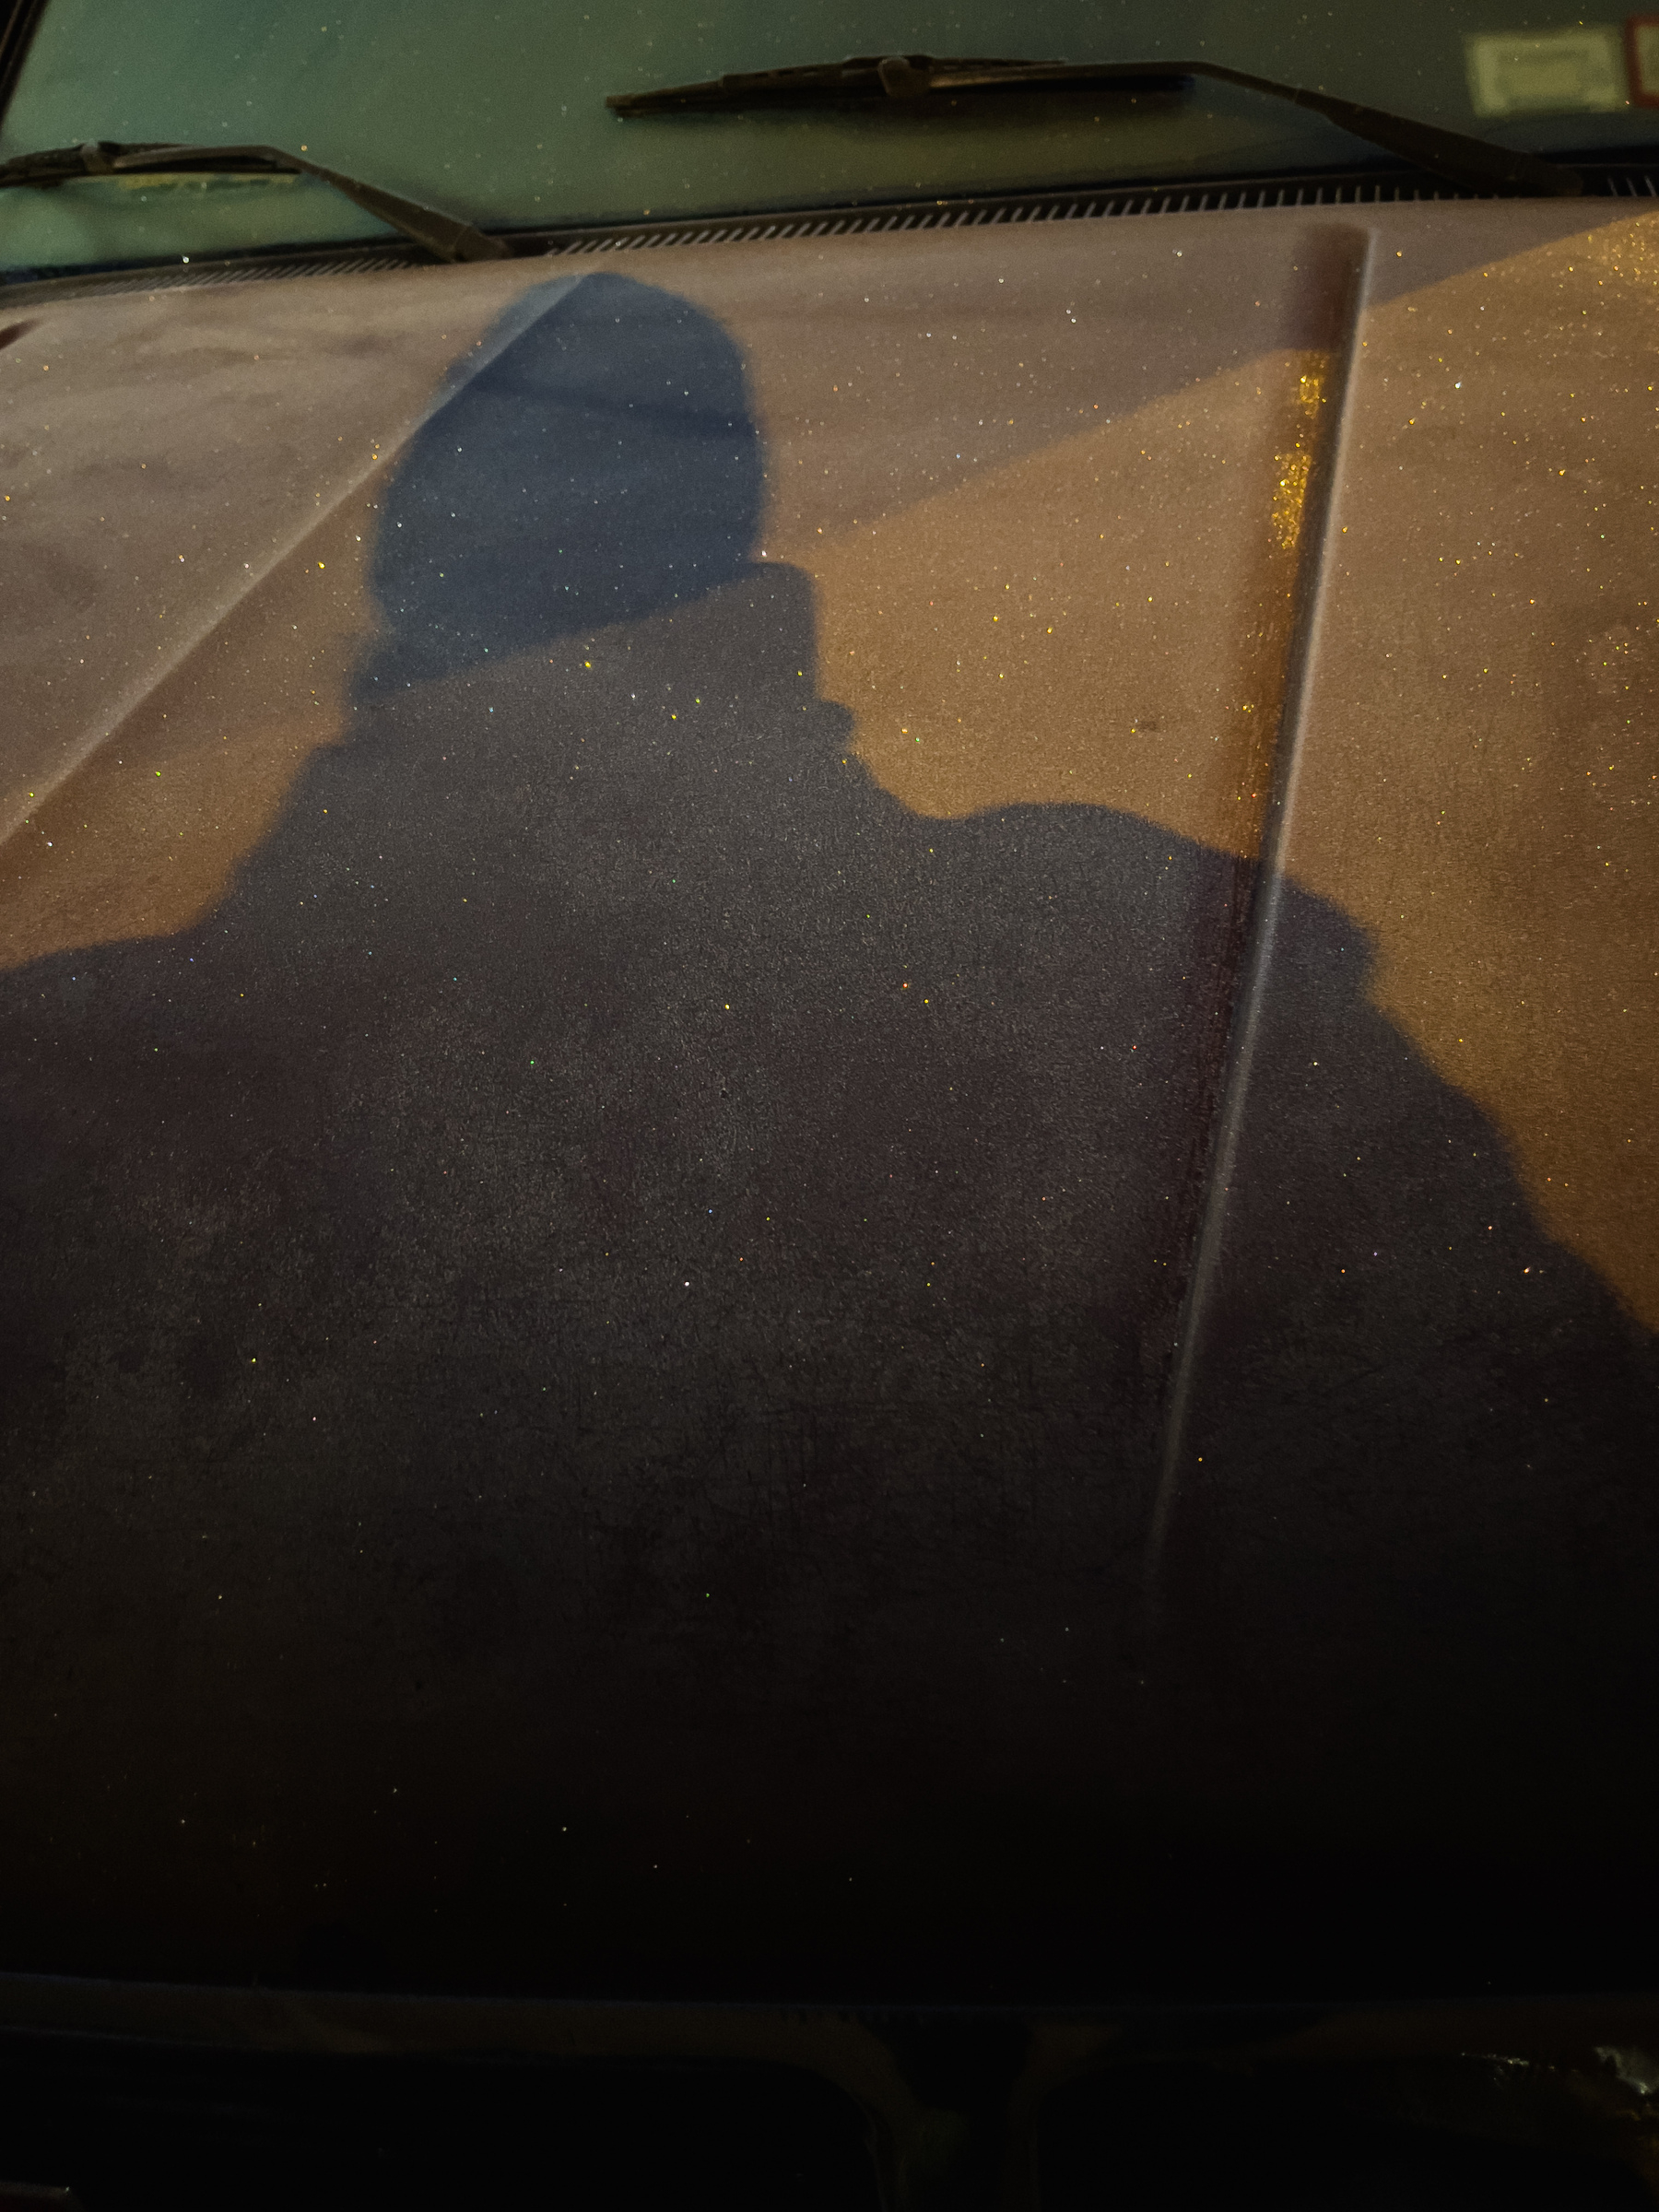 Shadow selfie on hood of a car in the early morning. Streetlight is source of light. Frost on the hood of the car.